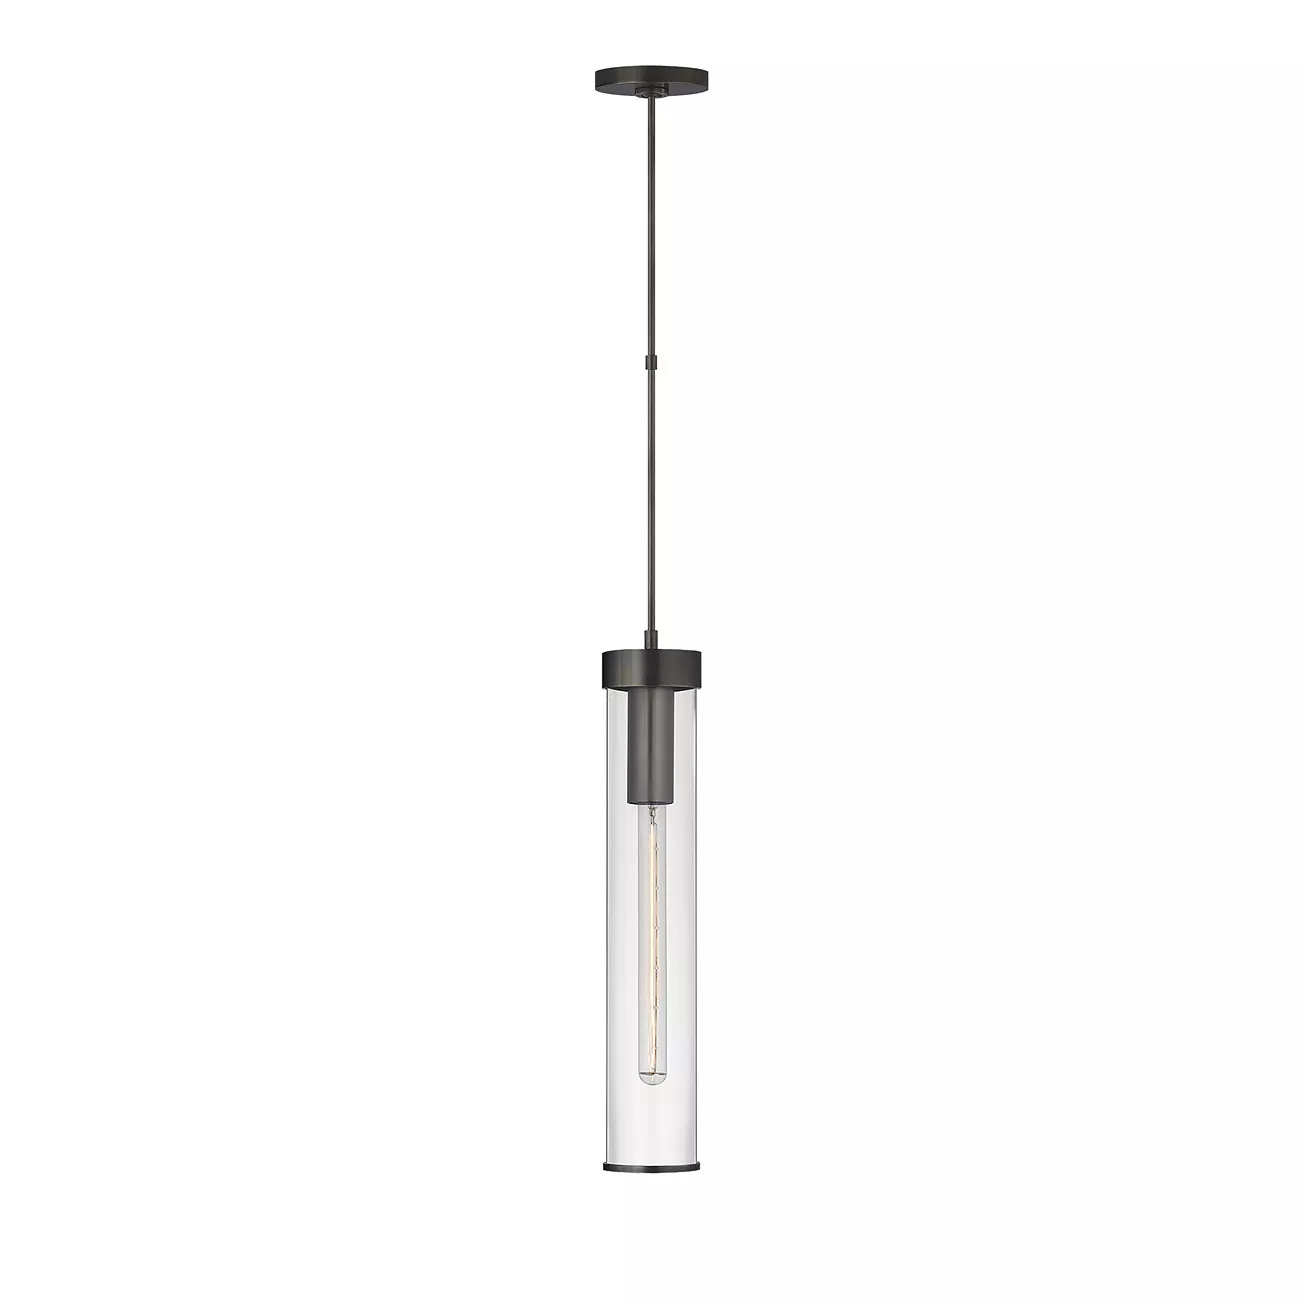 Kelly Wearstler Liaison Long Pendant with Clear Glass